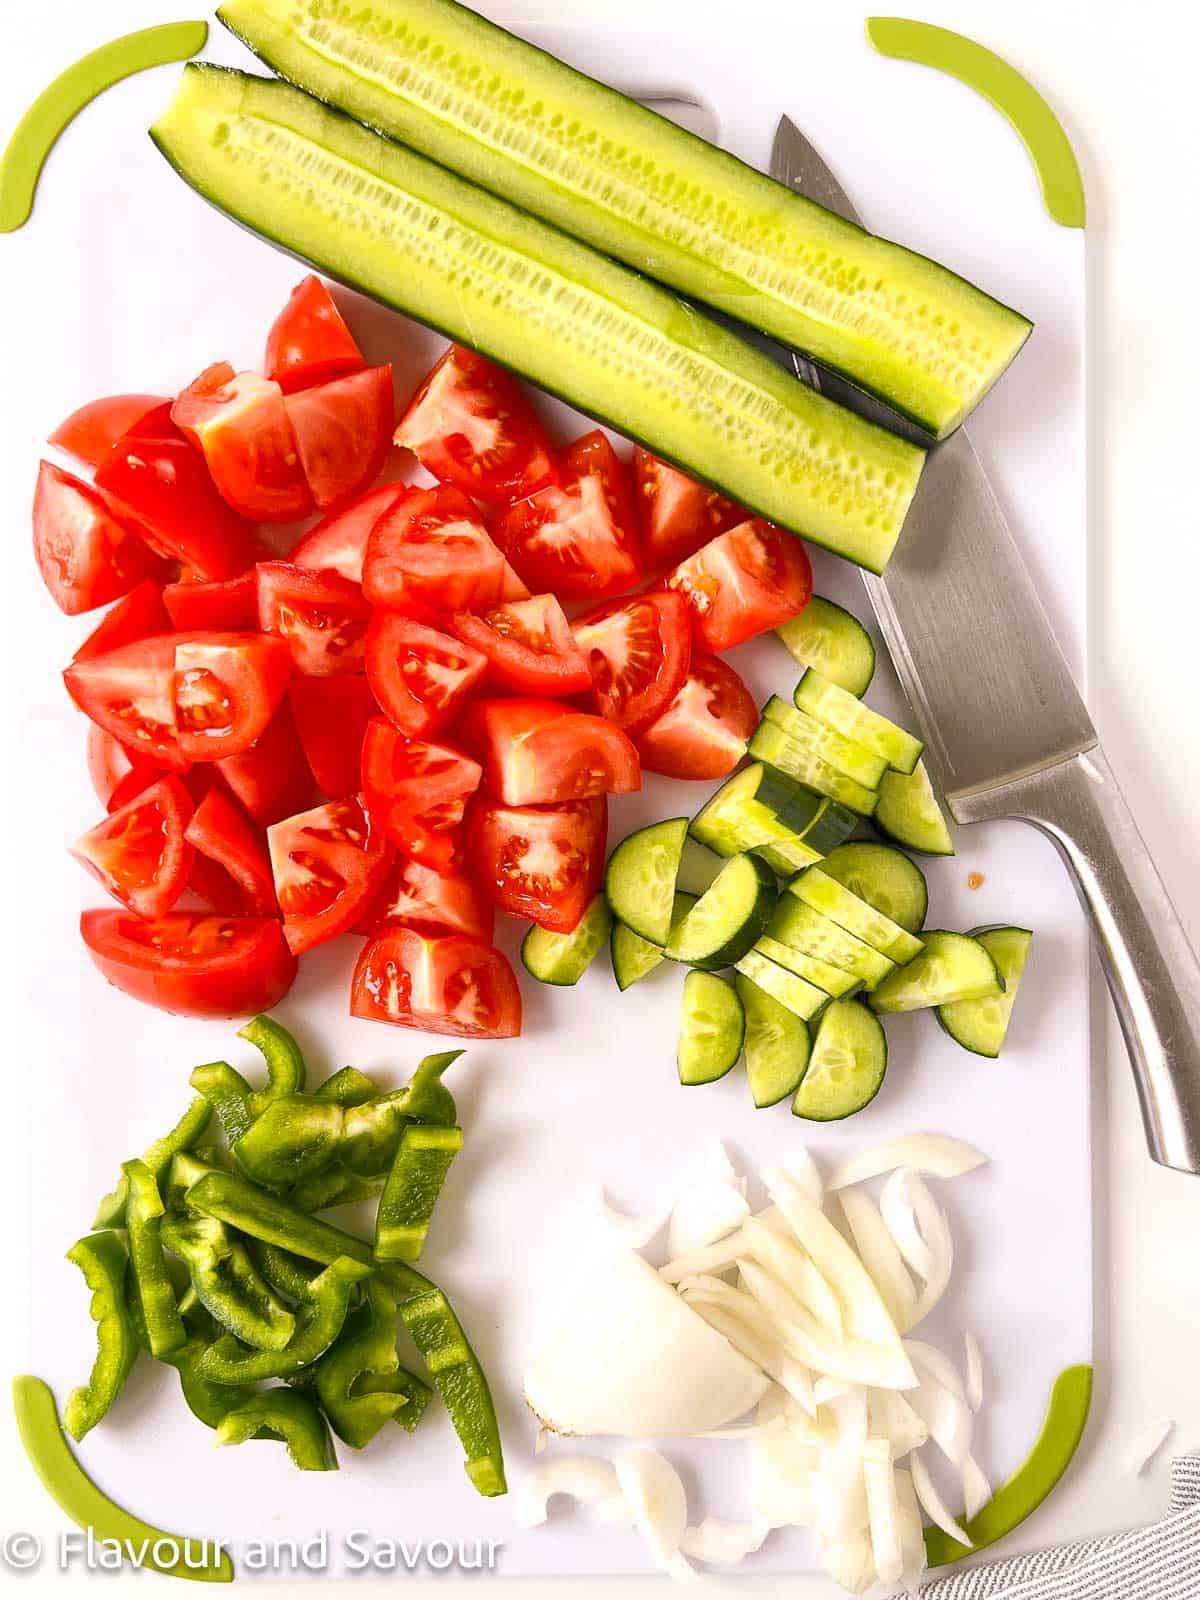 Chopped vegetables to make an authentic Greek salad.